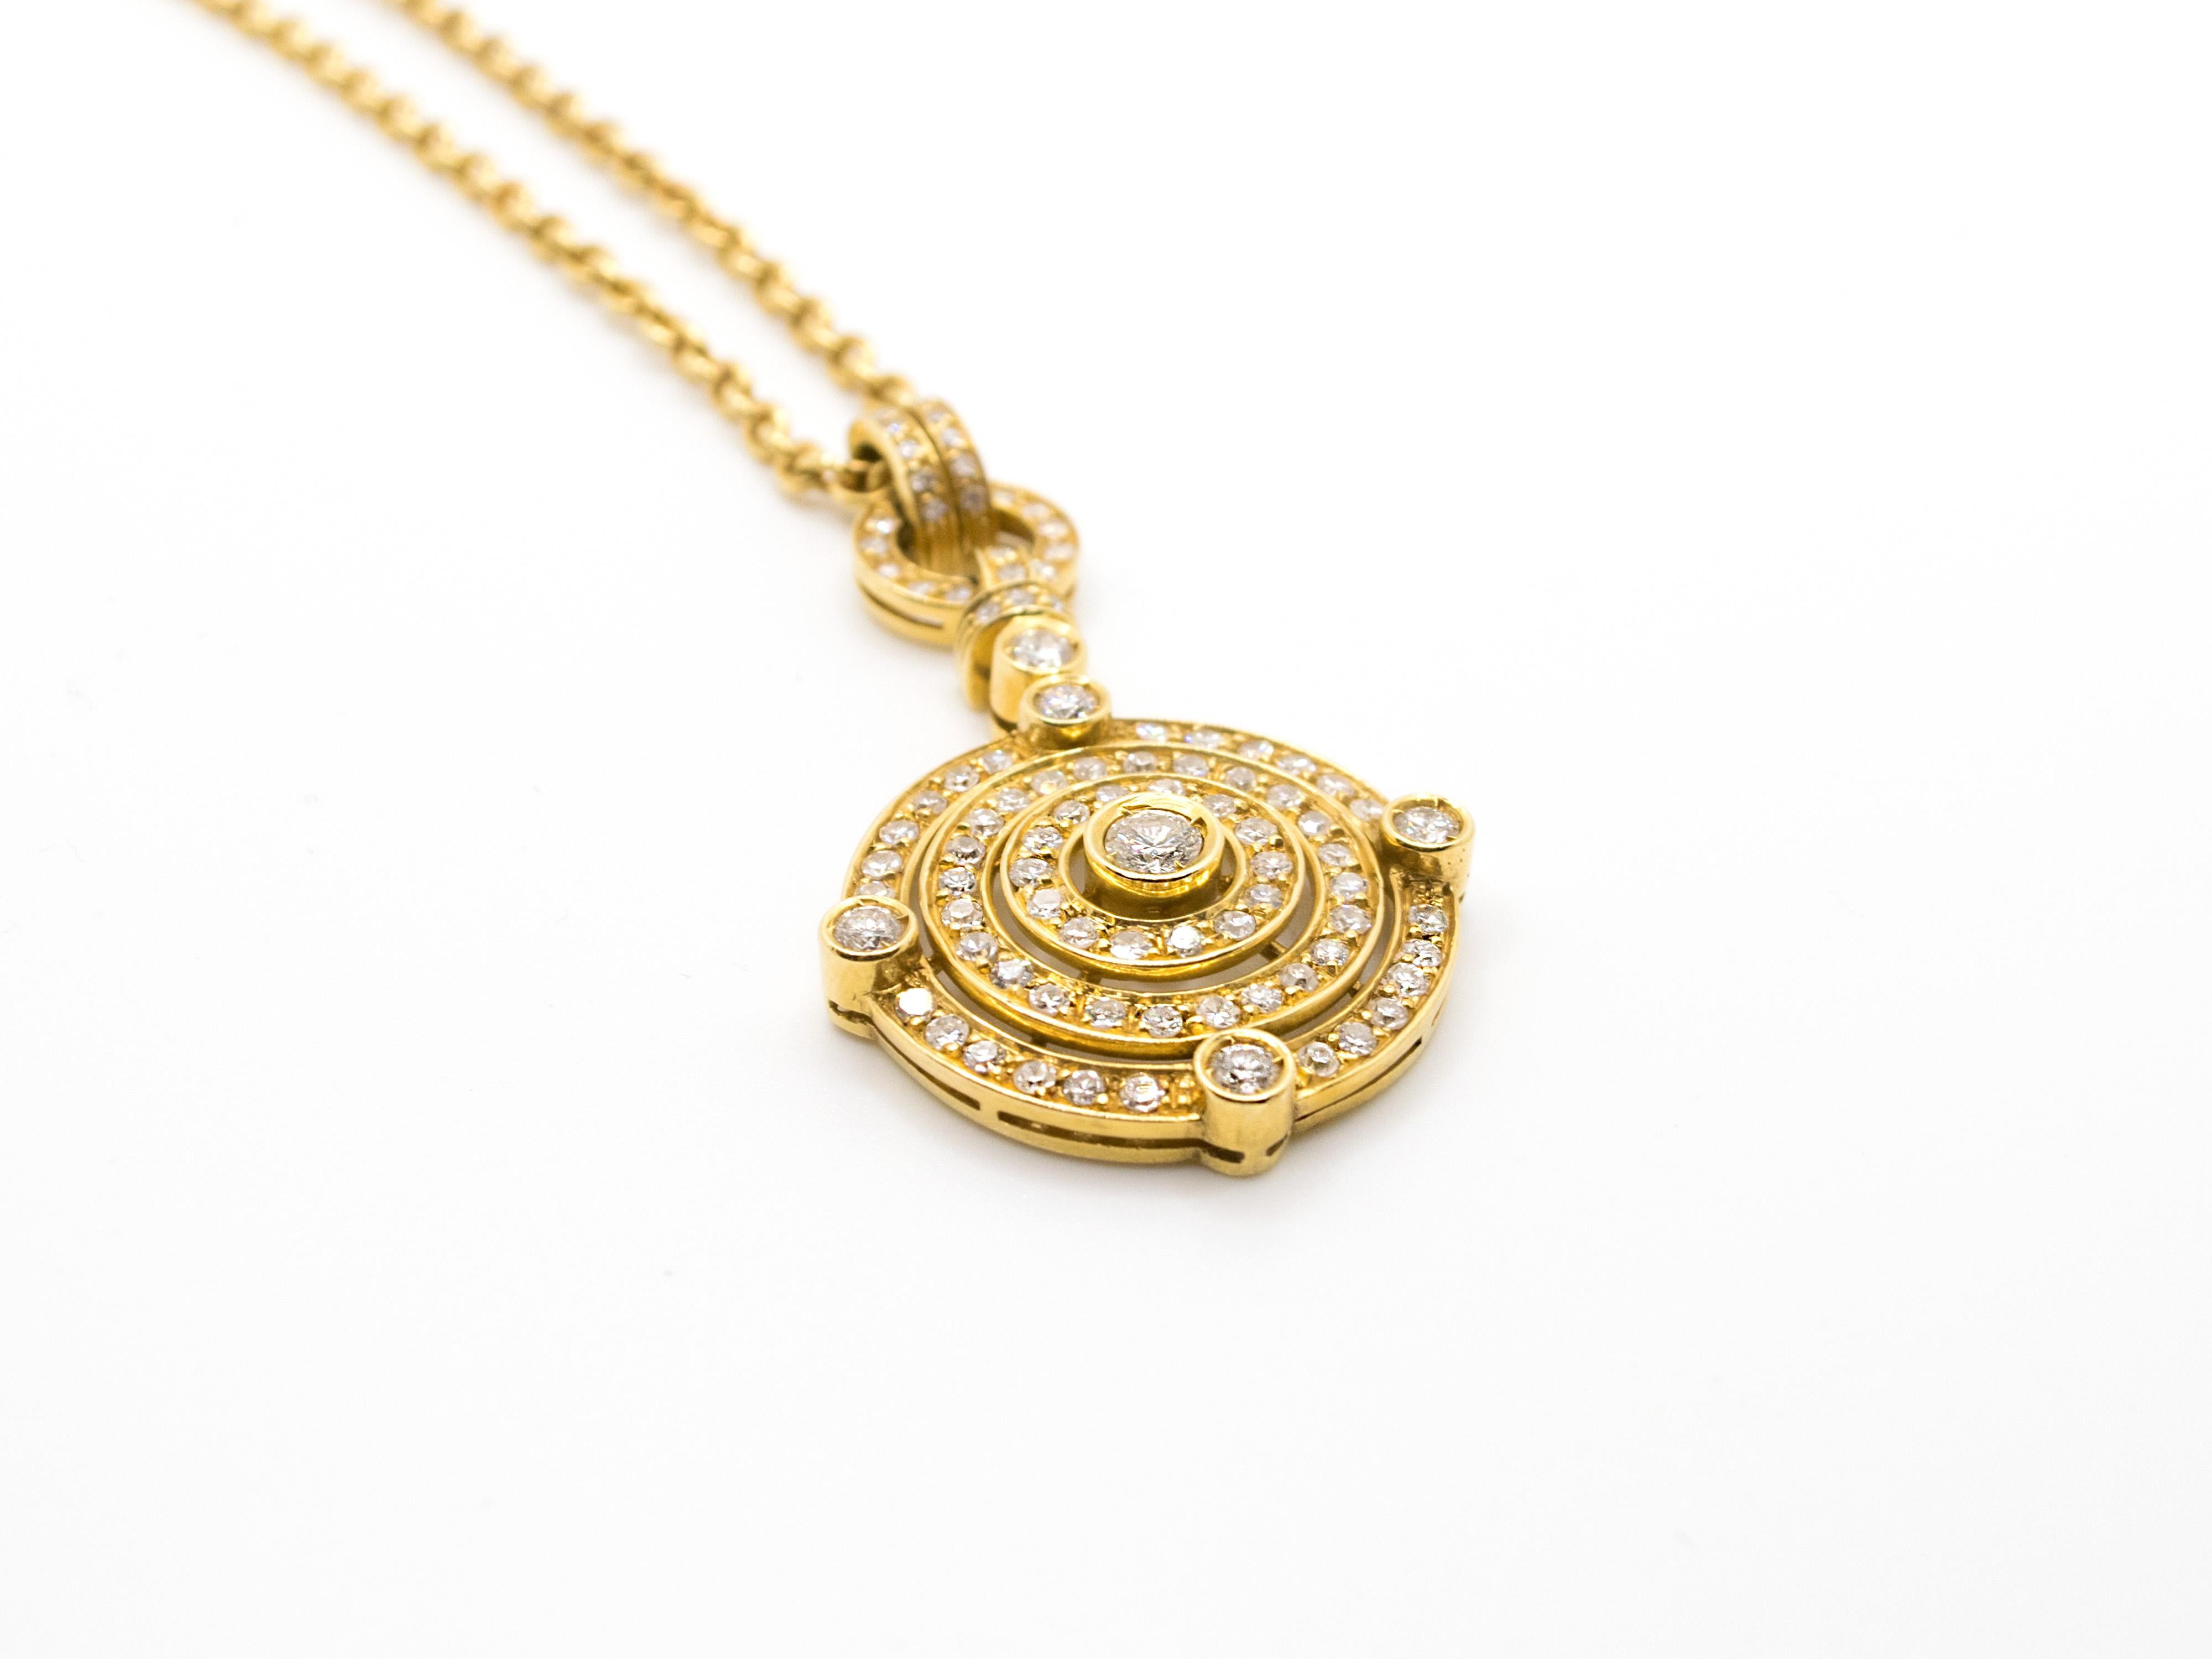 Brilliant Cut Ct 0.50 Diamonds and Yellow Gold Deco Style Charm and Necklace For Sale